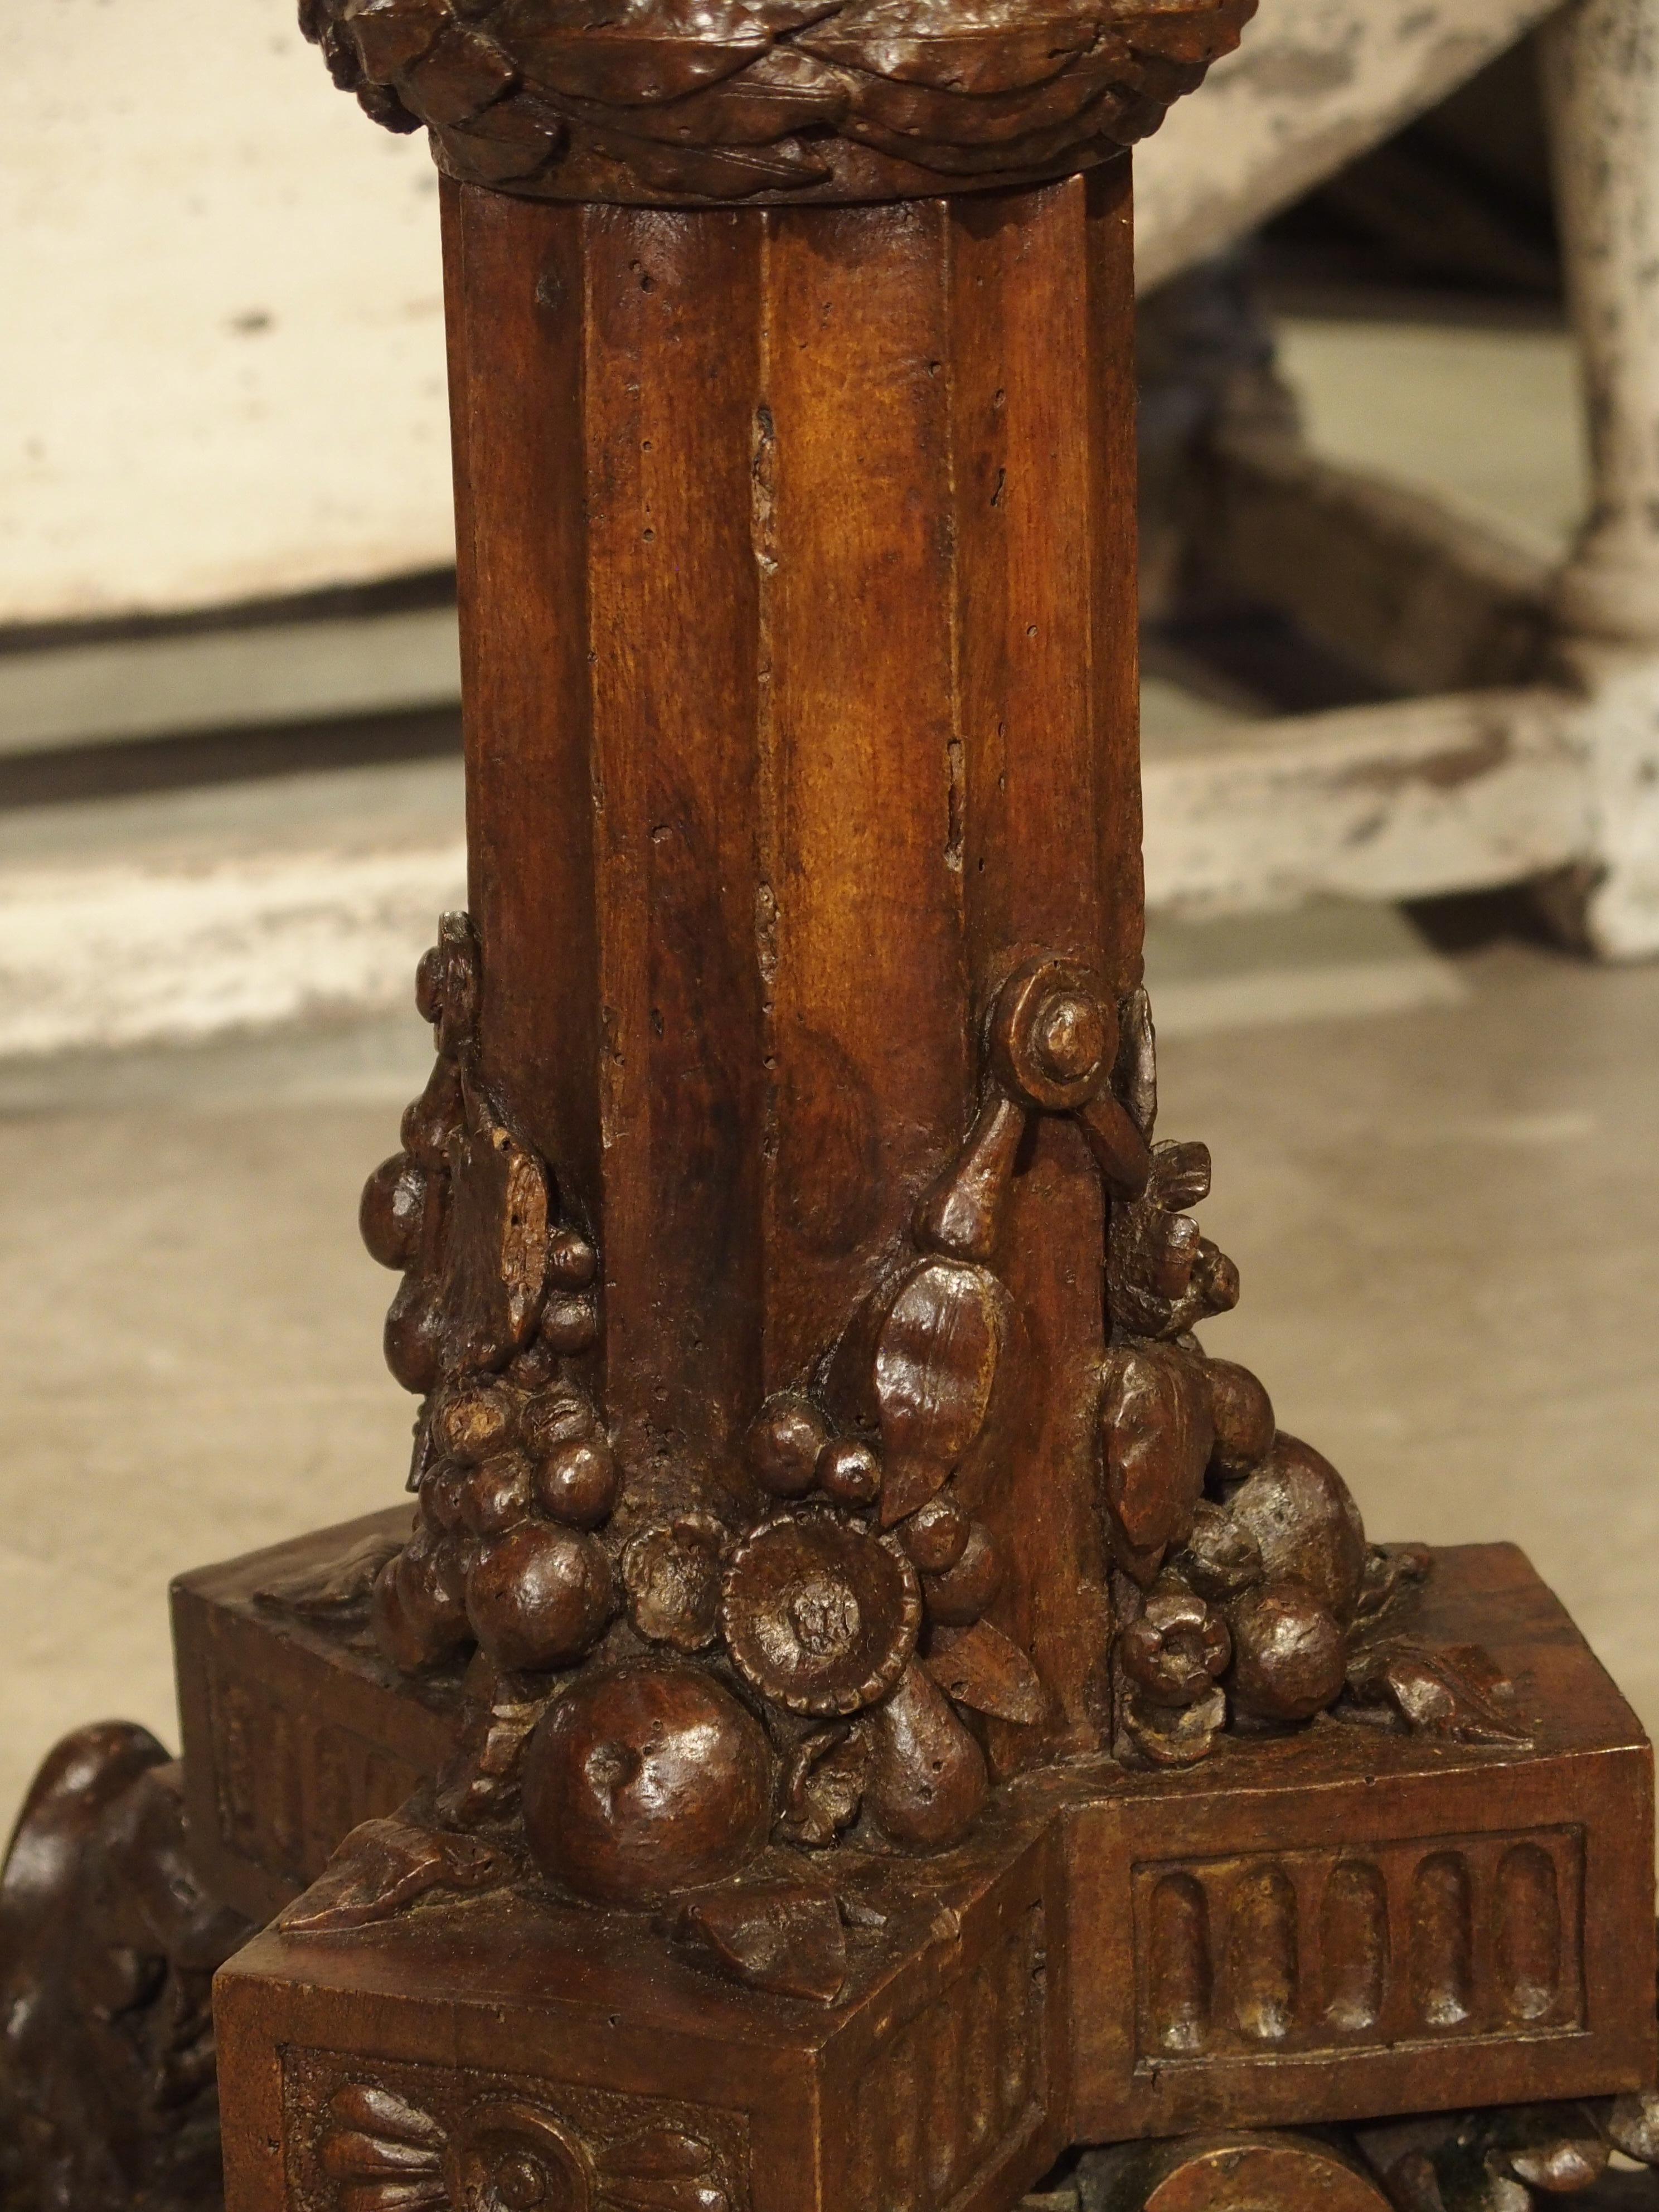 From Genoa Italy, this round walnut wood, bistro table with a marble top has the most spectacular hand carved pedestal. The round column beneath the marble top has Gothic style arches that end at the point where the wreath goes around the column.